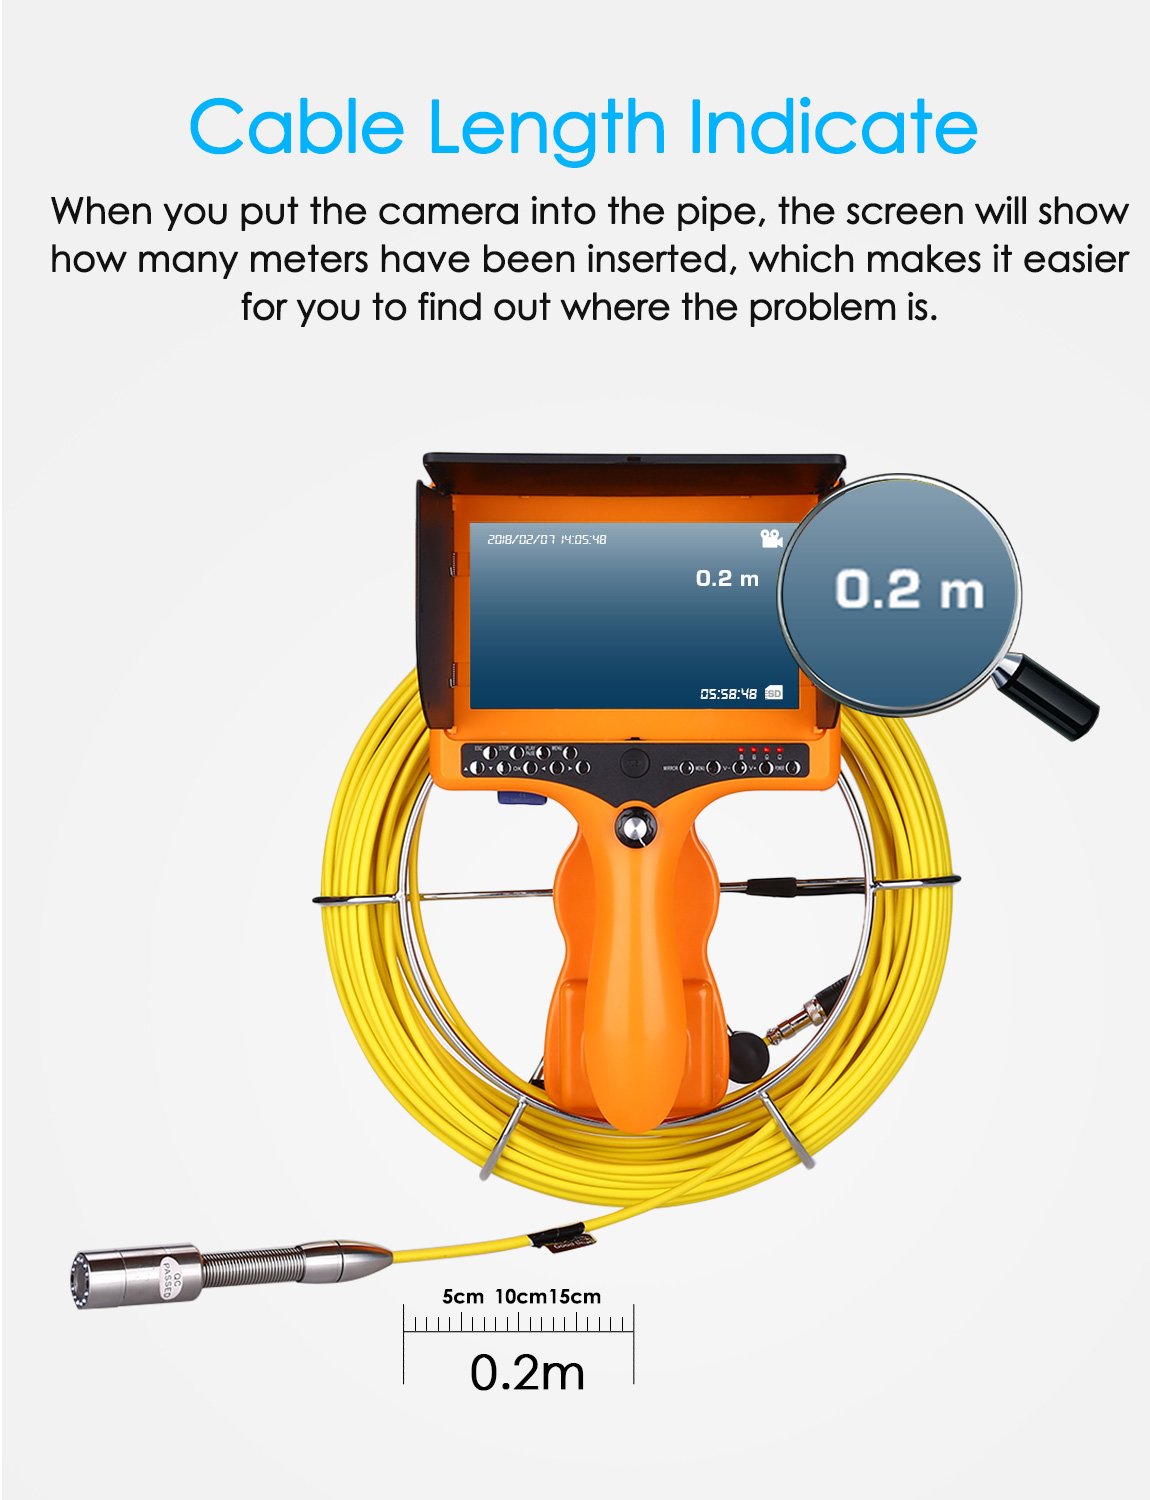 Eyoyo WF92 Pipe Pipeline Inspection Camera 20M/65ft Drain Sewer Industrial  Endoscope Video Plumbing System with 7 Inch LCD Monitor 1000TVL DVR Record